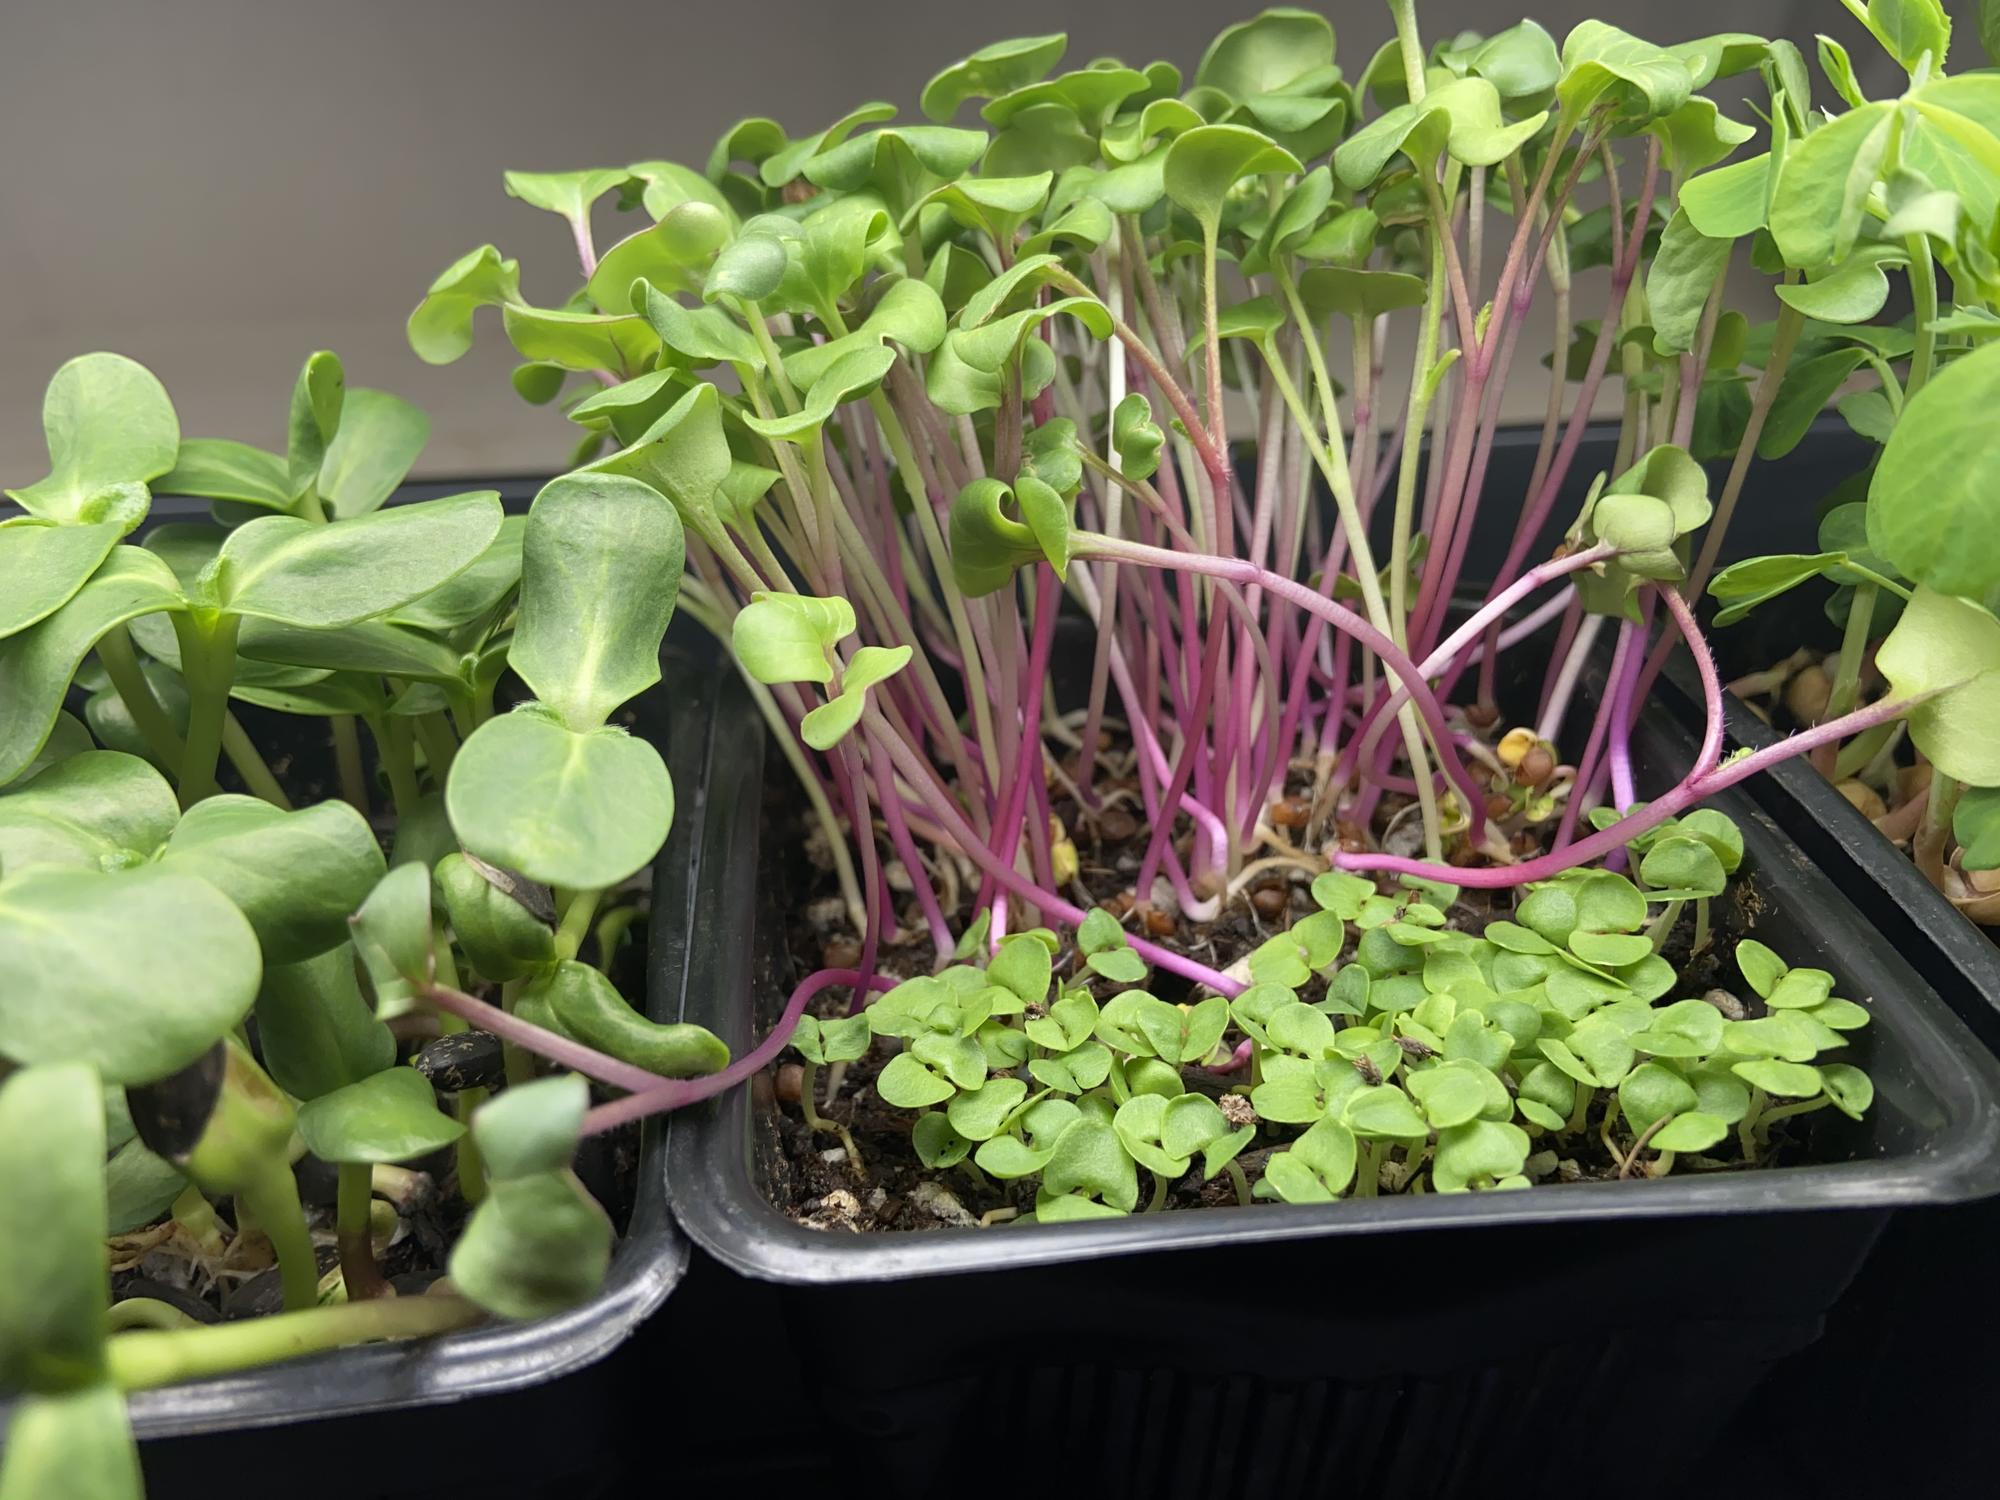 microgreens growing in plastic container